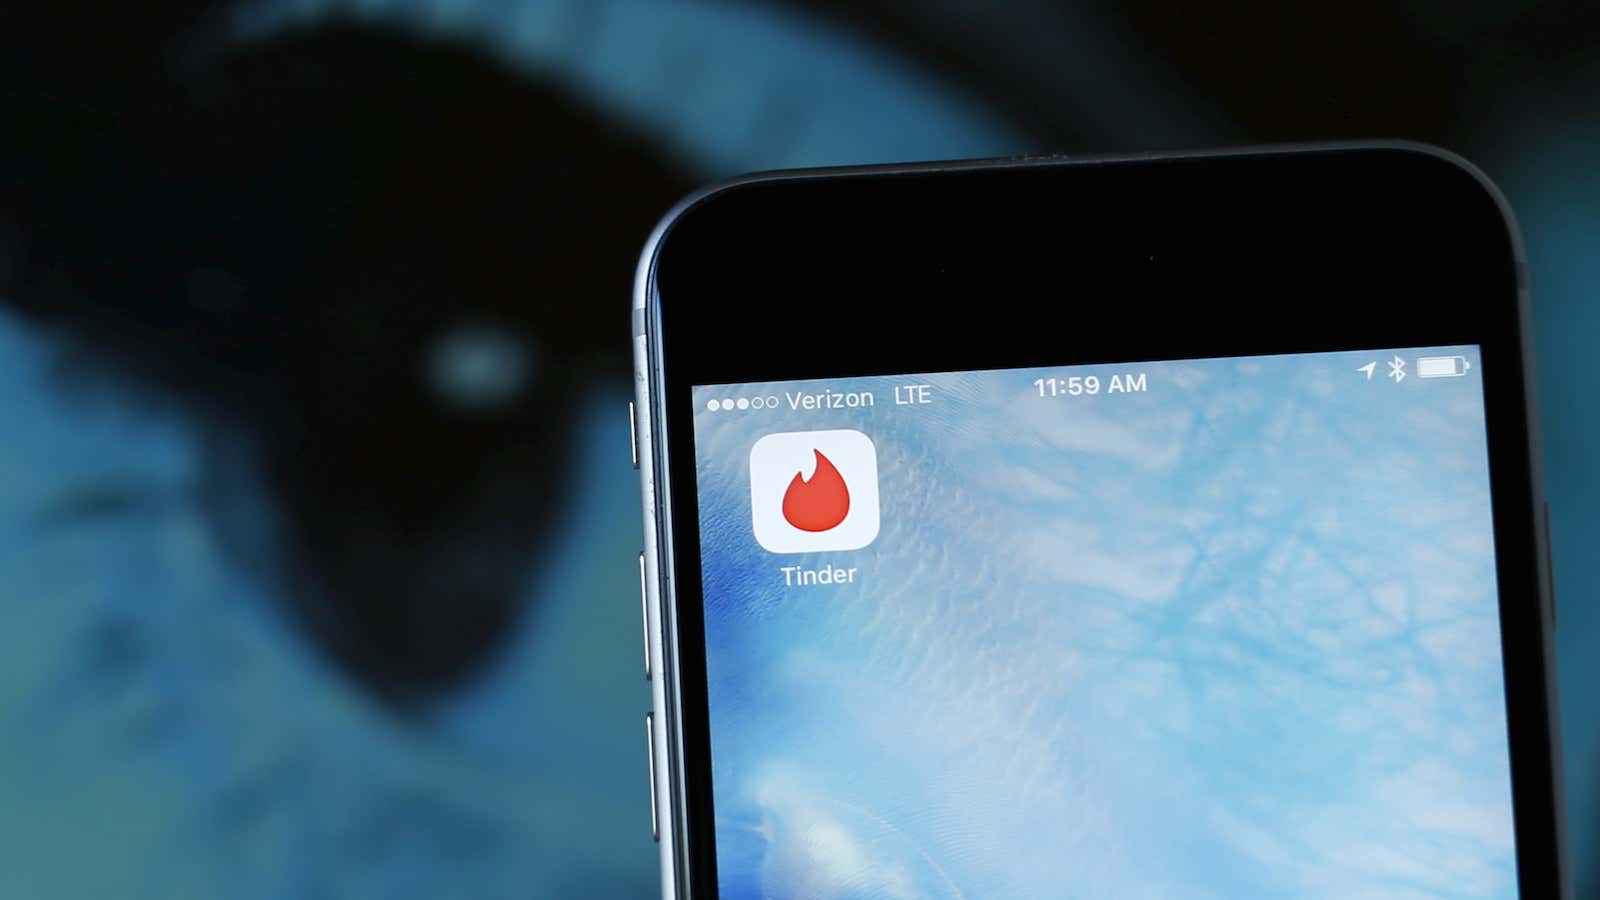 Tinder may be a bit too open with your personal info.